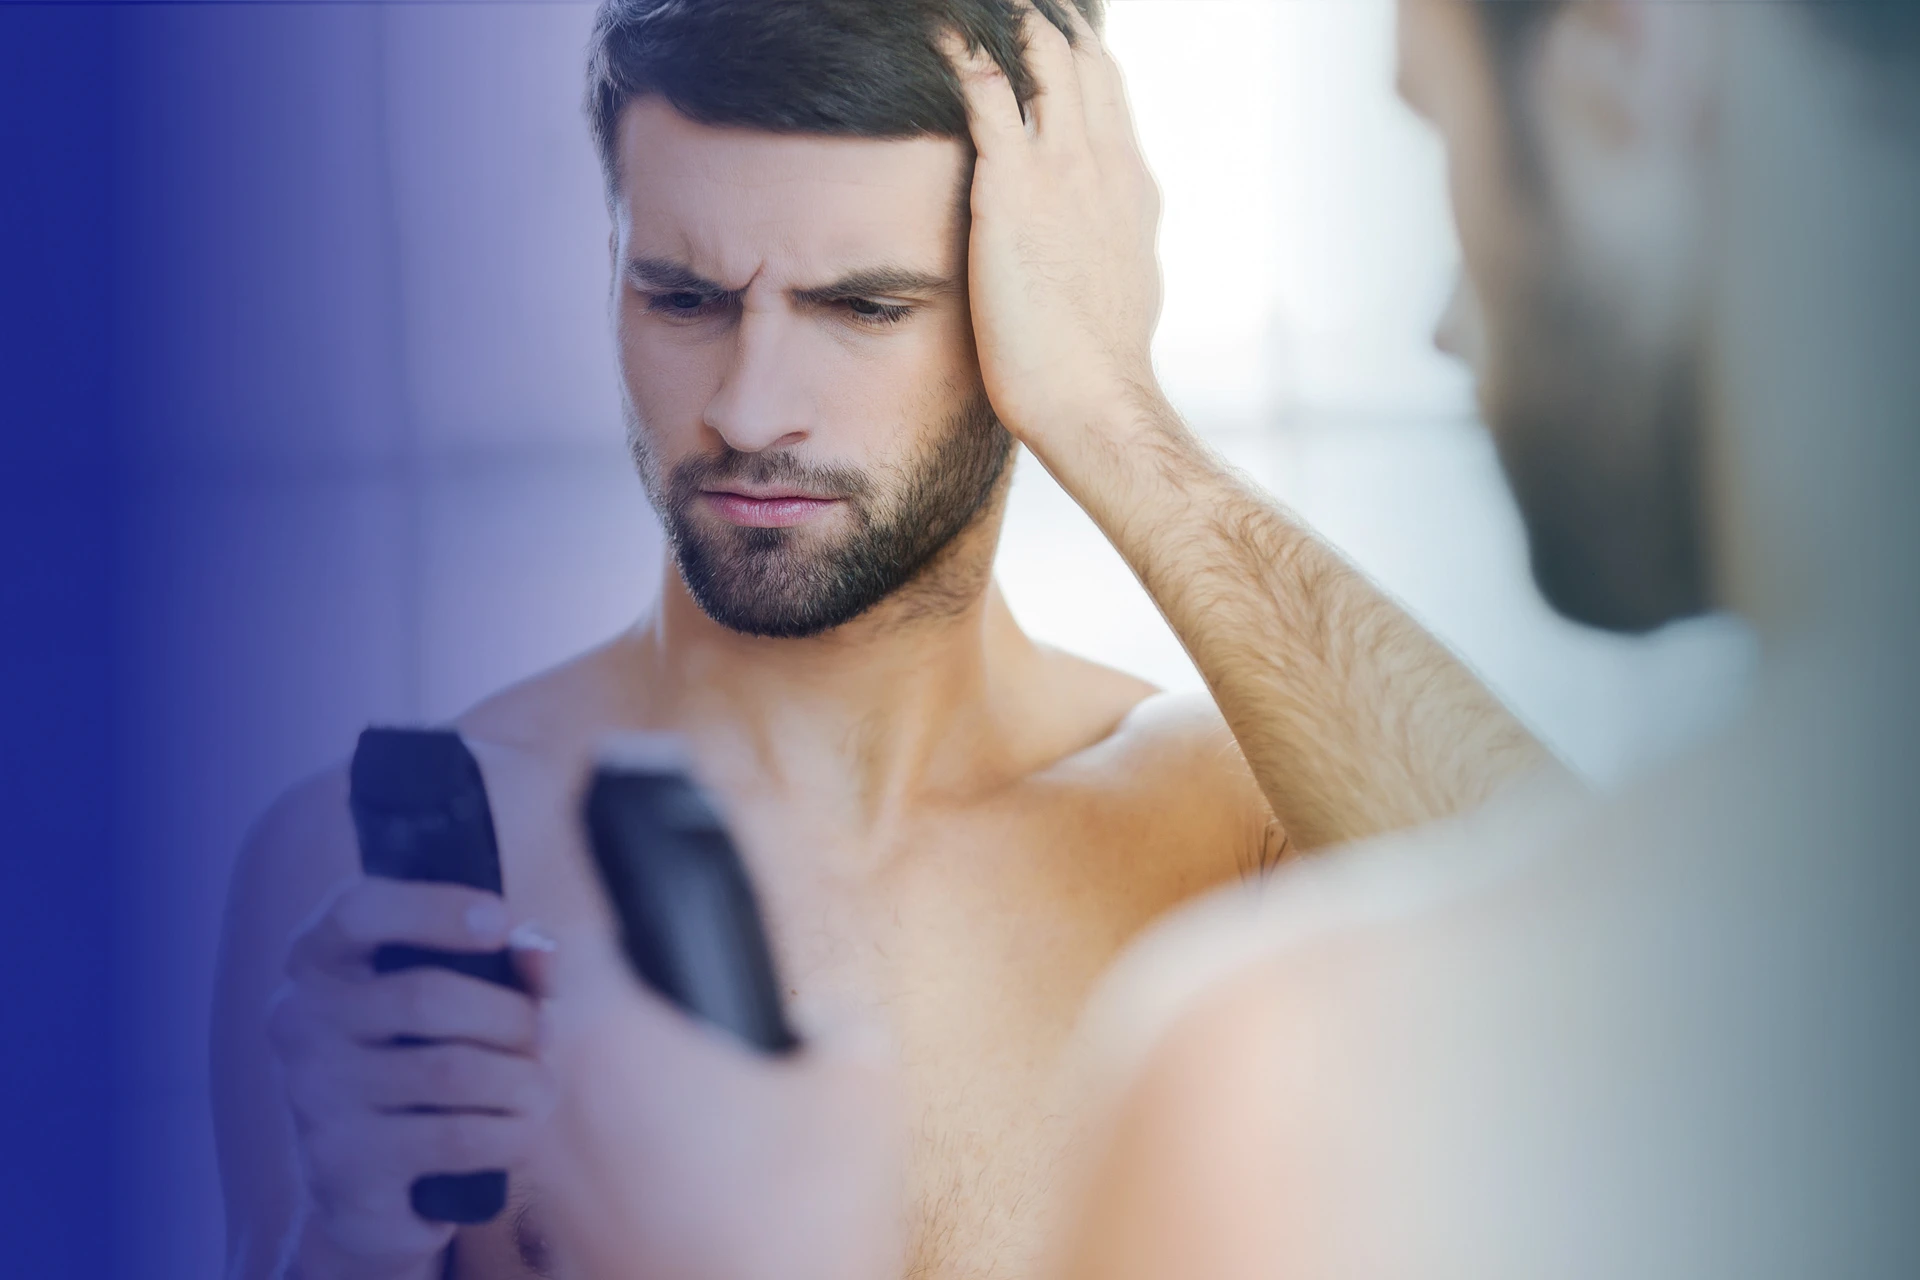 guide to buying an electric shaver